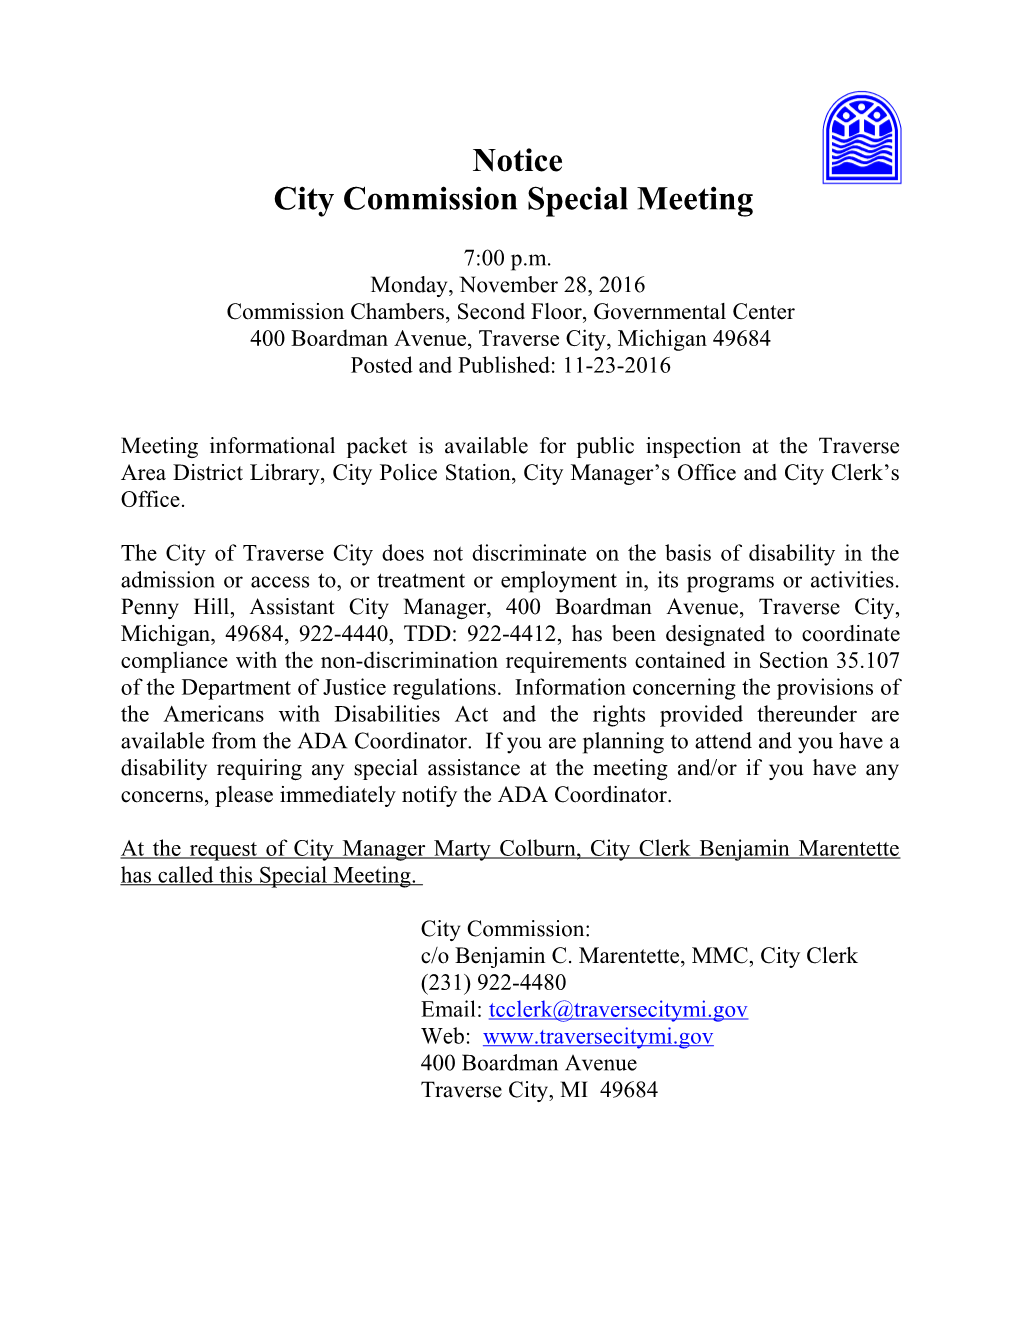 City Commission Special Meeting